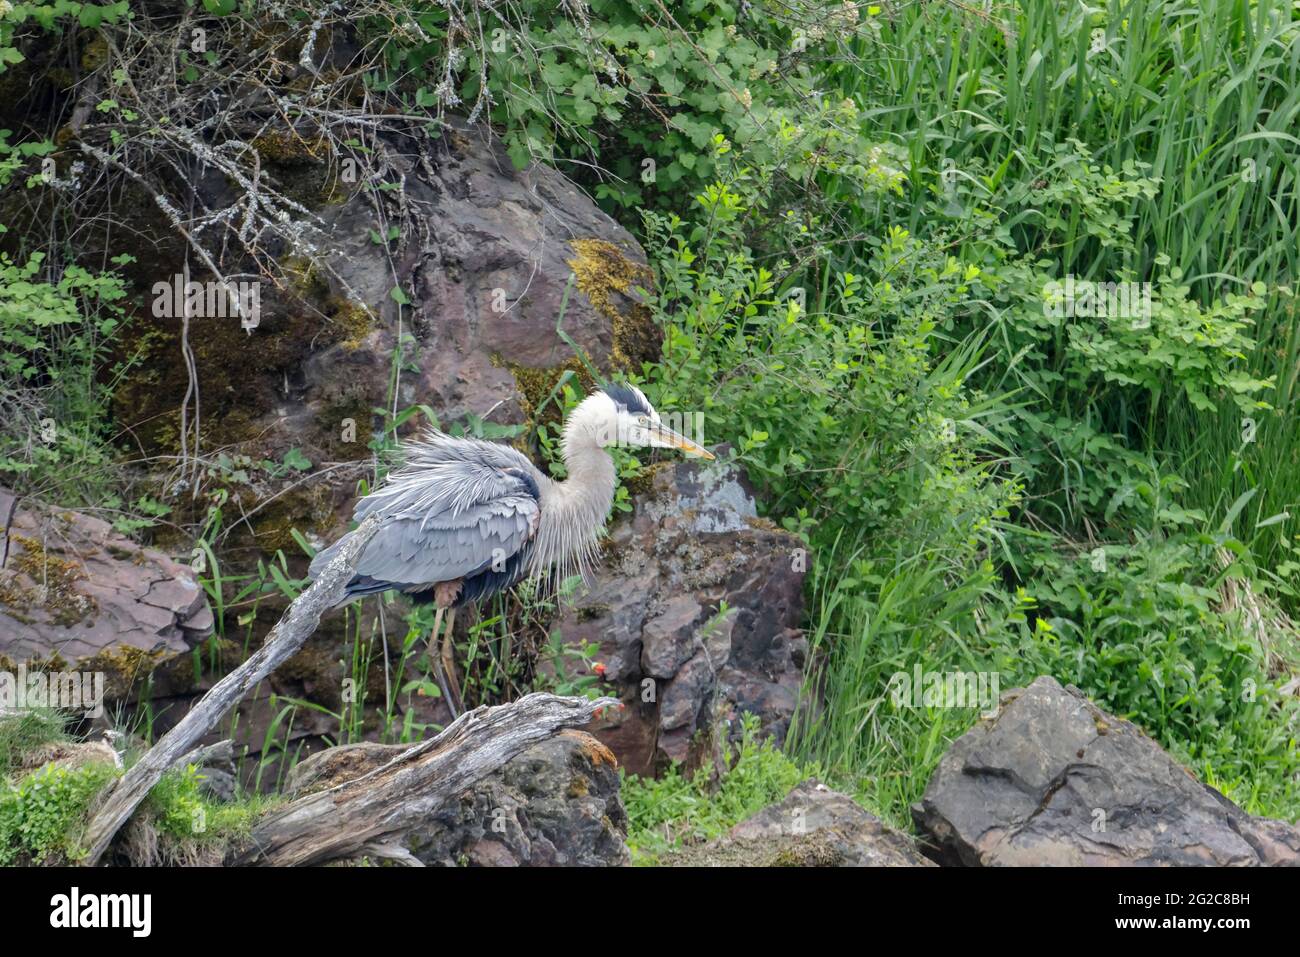 A great blue heron is perched on a rock by a lake near Coeur d'Alene, Idaho. Stock Photo